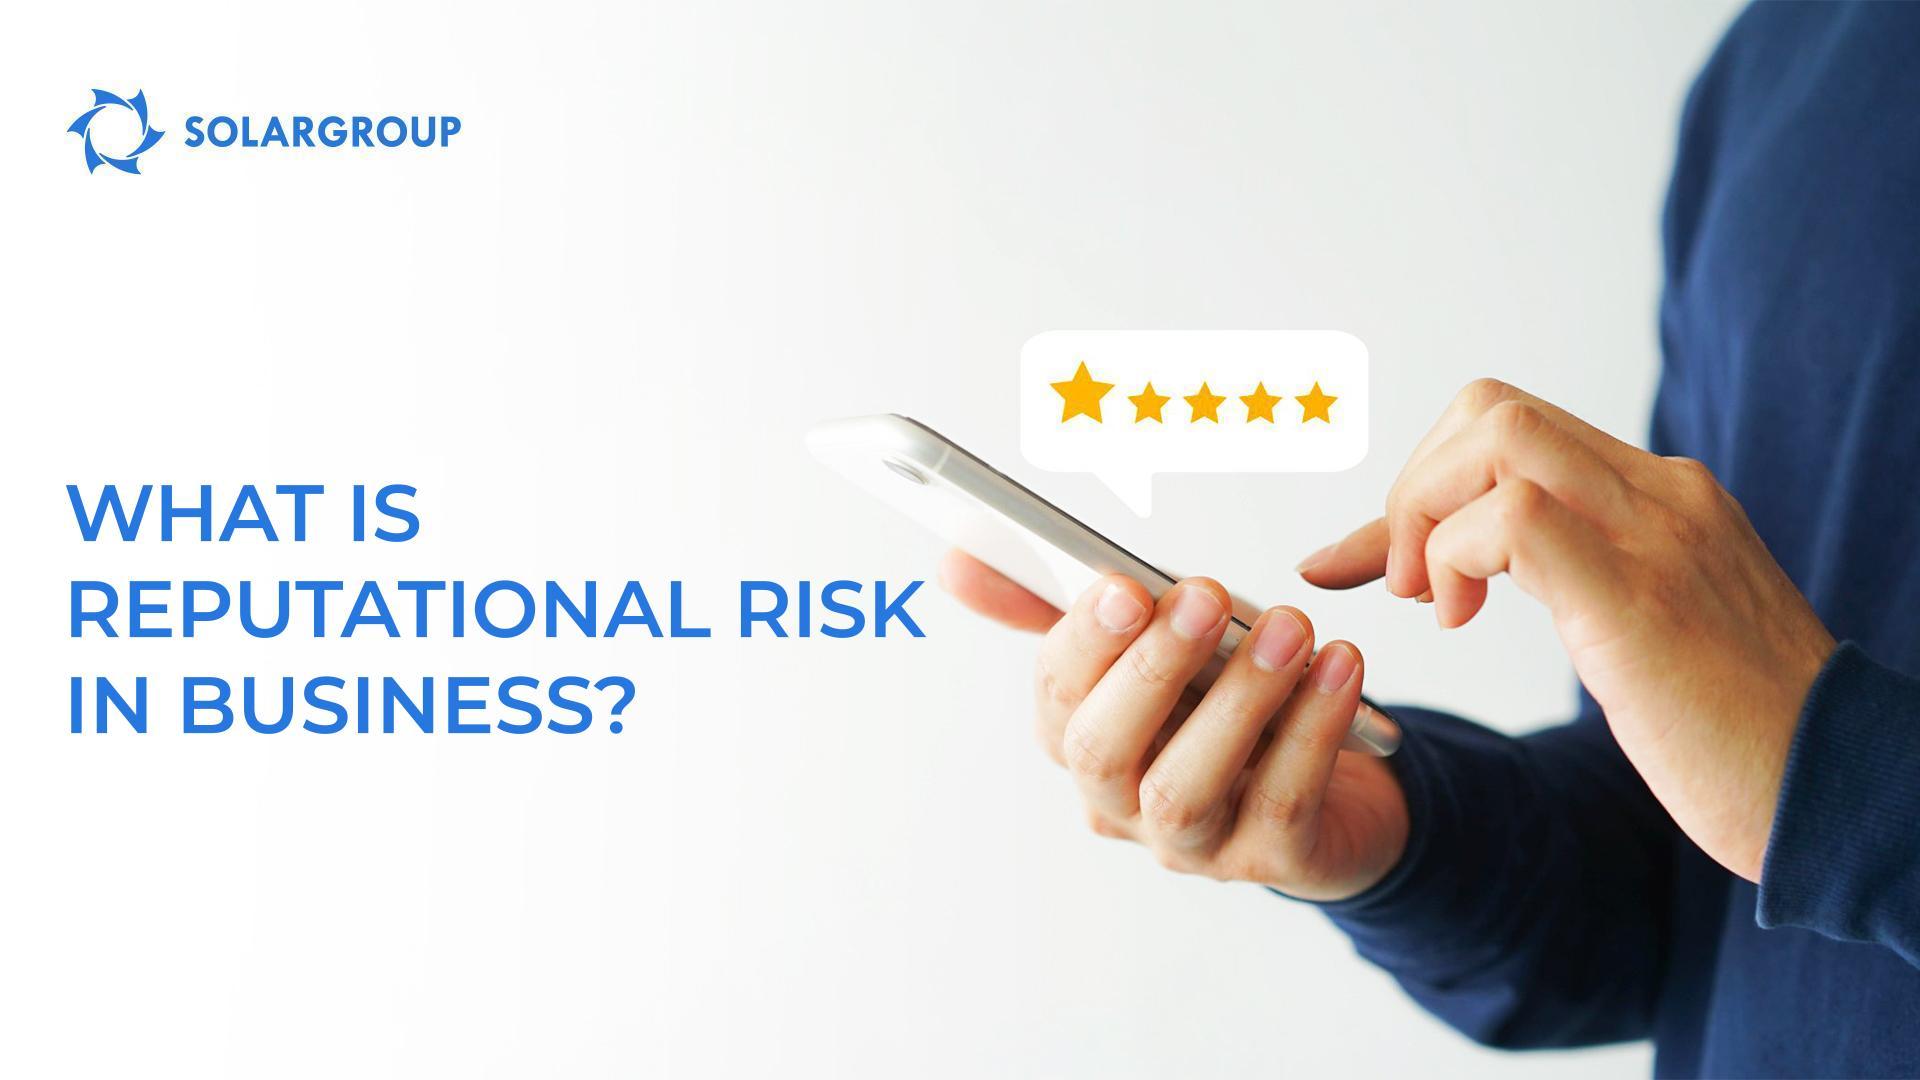 What is reputational risk in business